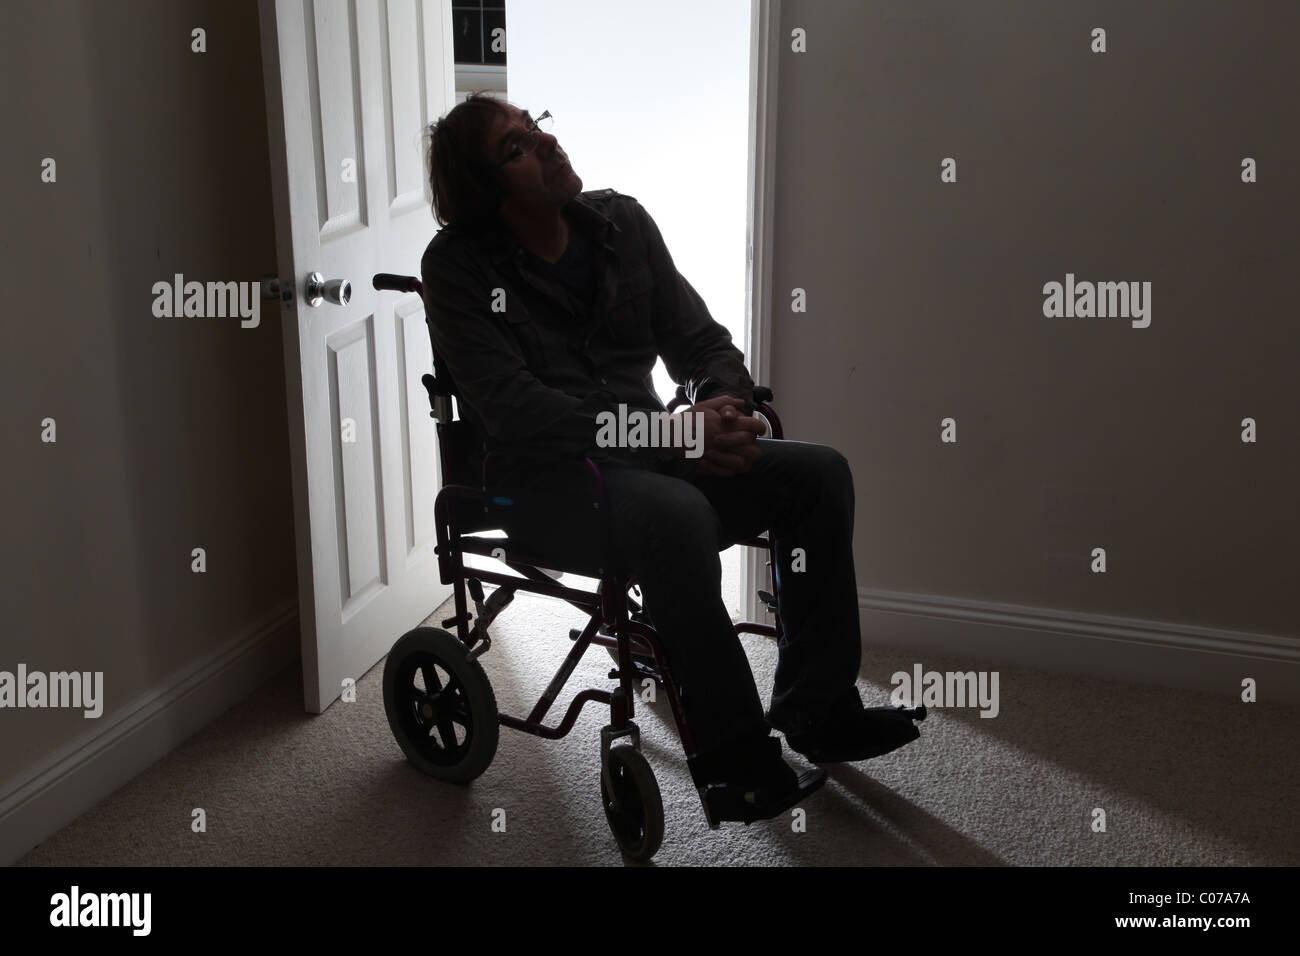 Man in a wheelchair alone by an open door Stock Photo